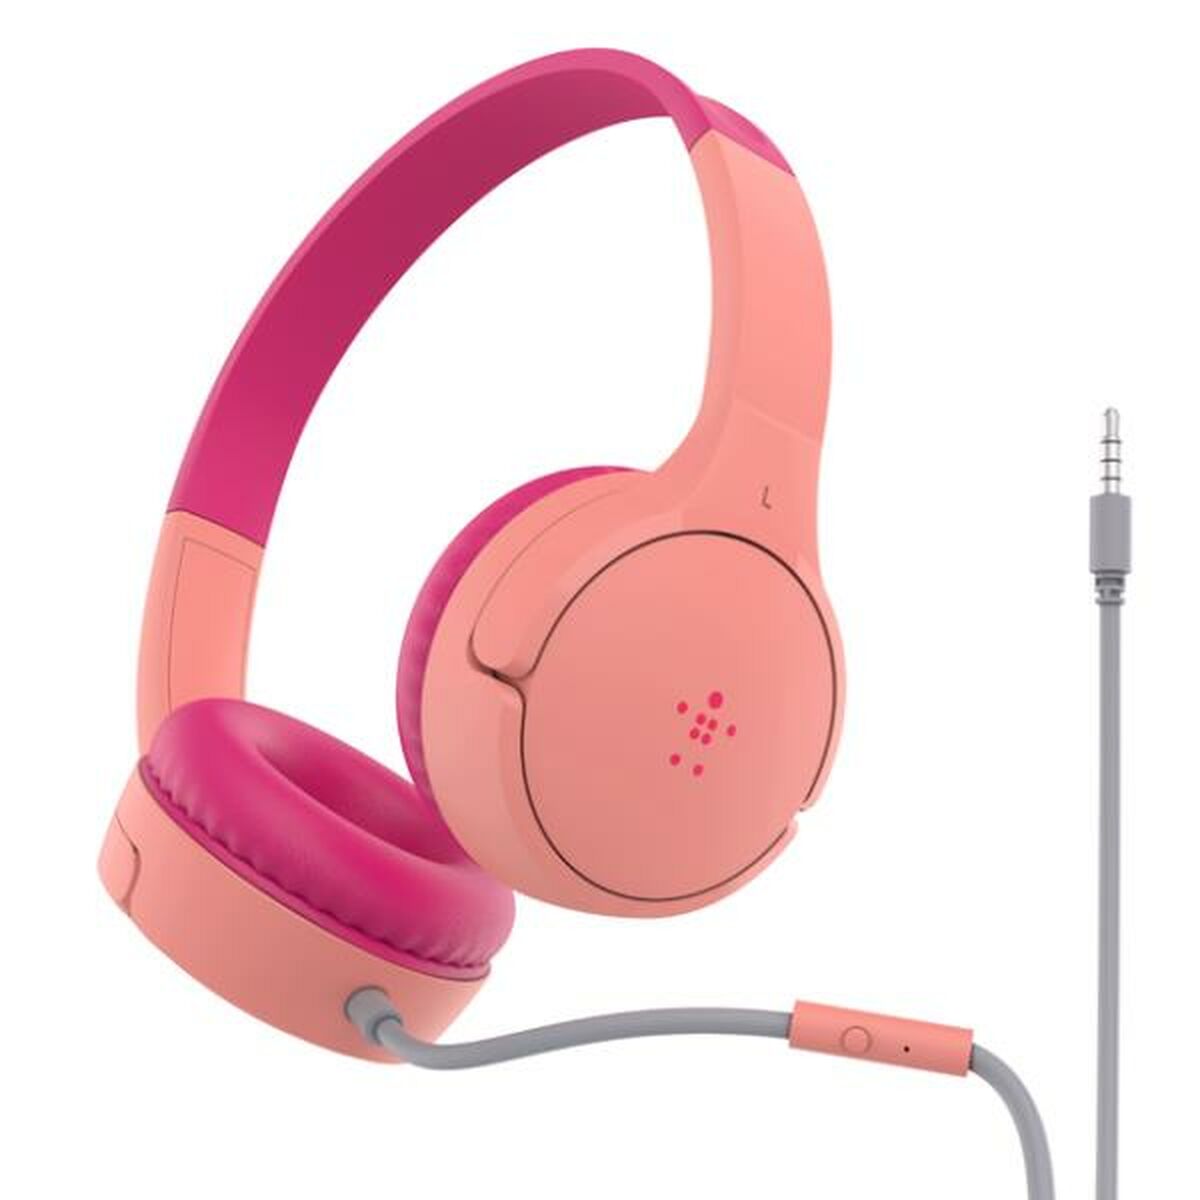 Headphones Belkin AUD004BTPK Fuchsia, Belkin, Electronics, Mobile communication and accessories, headphones-belkin-aud004btpk-fuchsia, Brand_Belkin, category-reference-2609, category-reference-2642, category-reference-2847, category-reference-t-19653, category-reference-t-21312, category-reference-t-4036, category-reference-t-4037, computers / peripherals, Condition_NEW, entertainment, music, office, Price_20 - 50, telephones & tablets, Teleworking, RiotNook